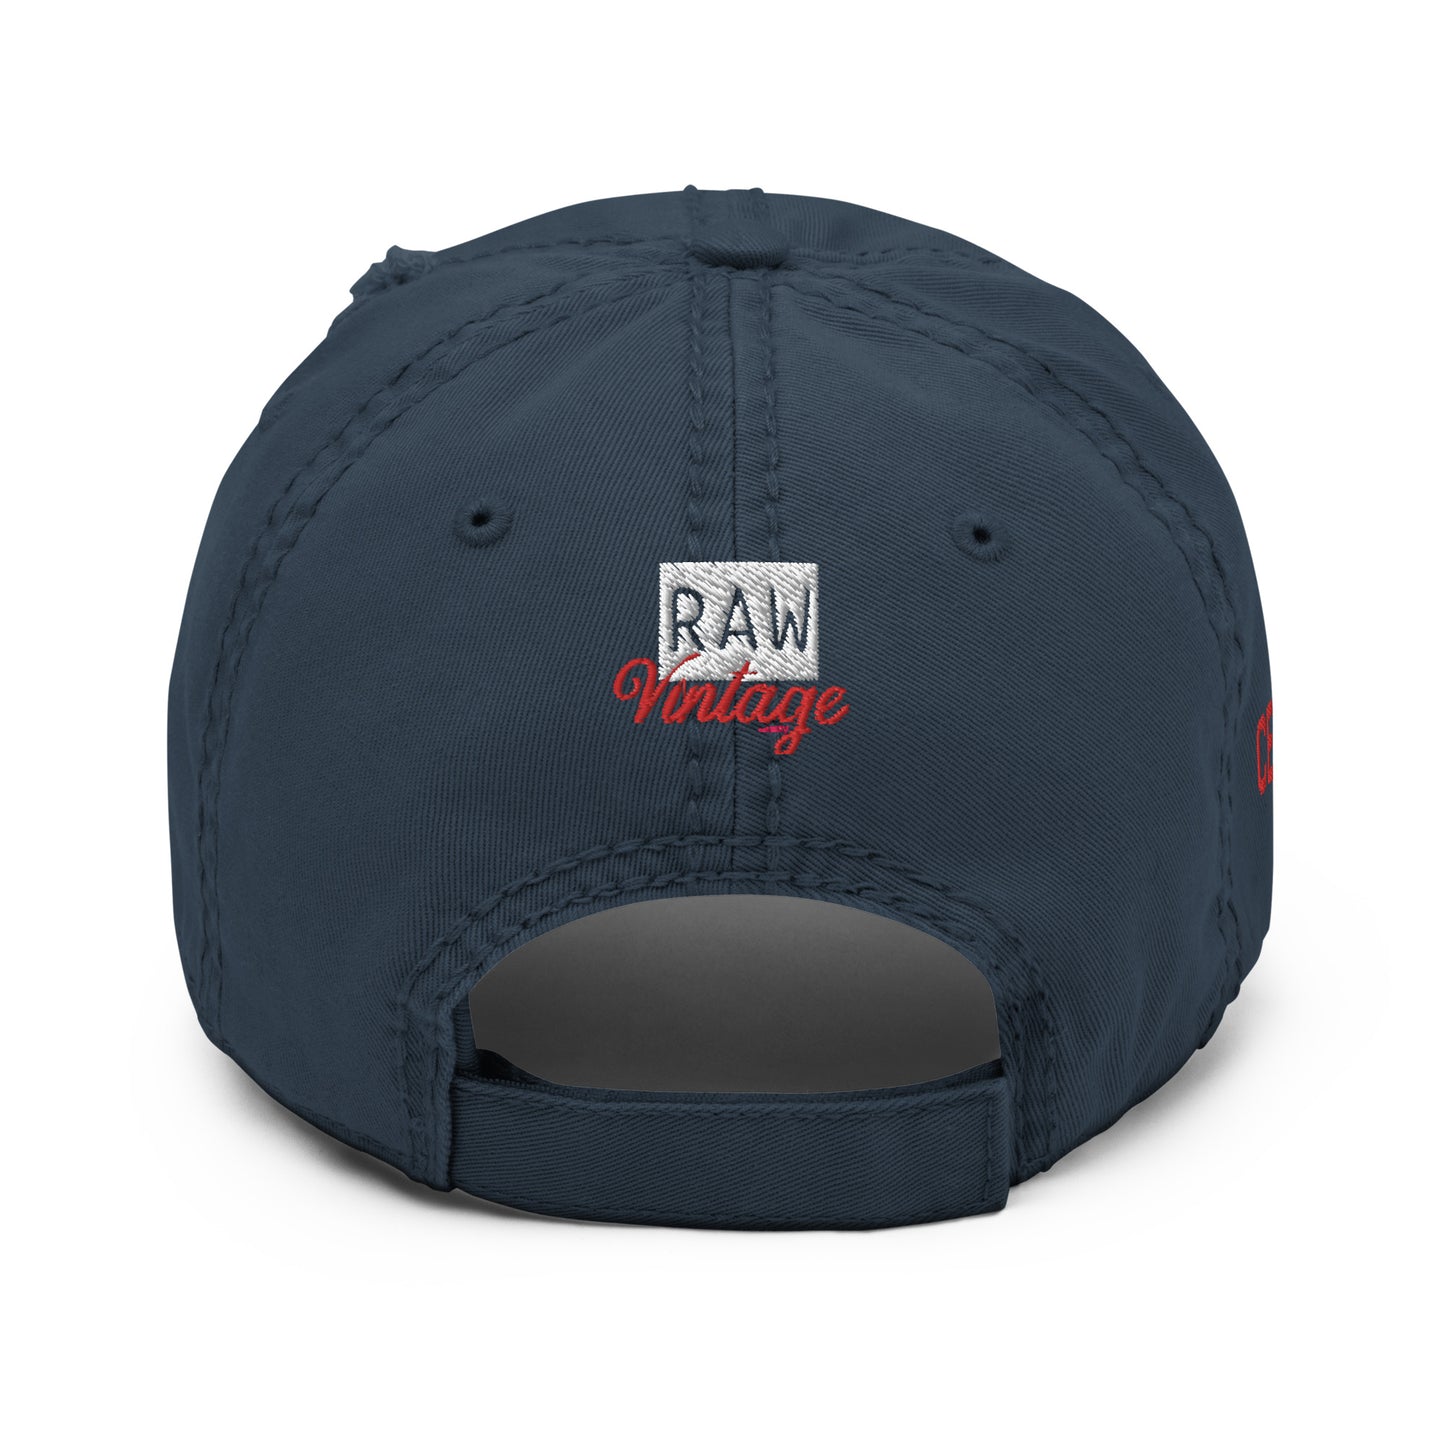 Been Dope Supply | Distressed Navy Dad Hat | Embroidered